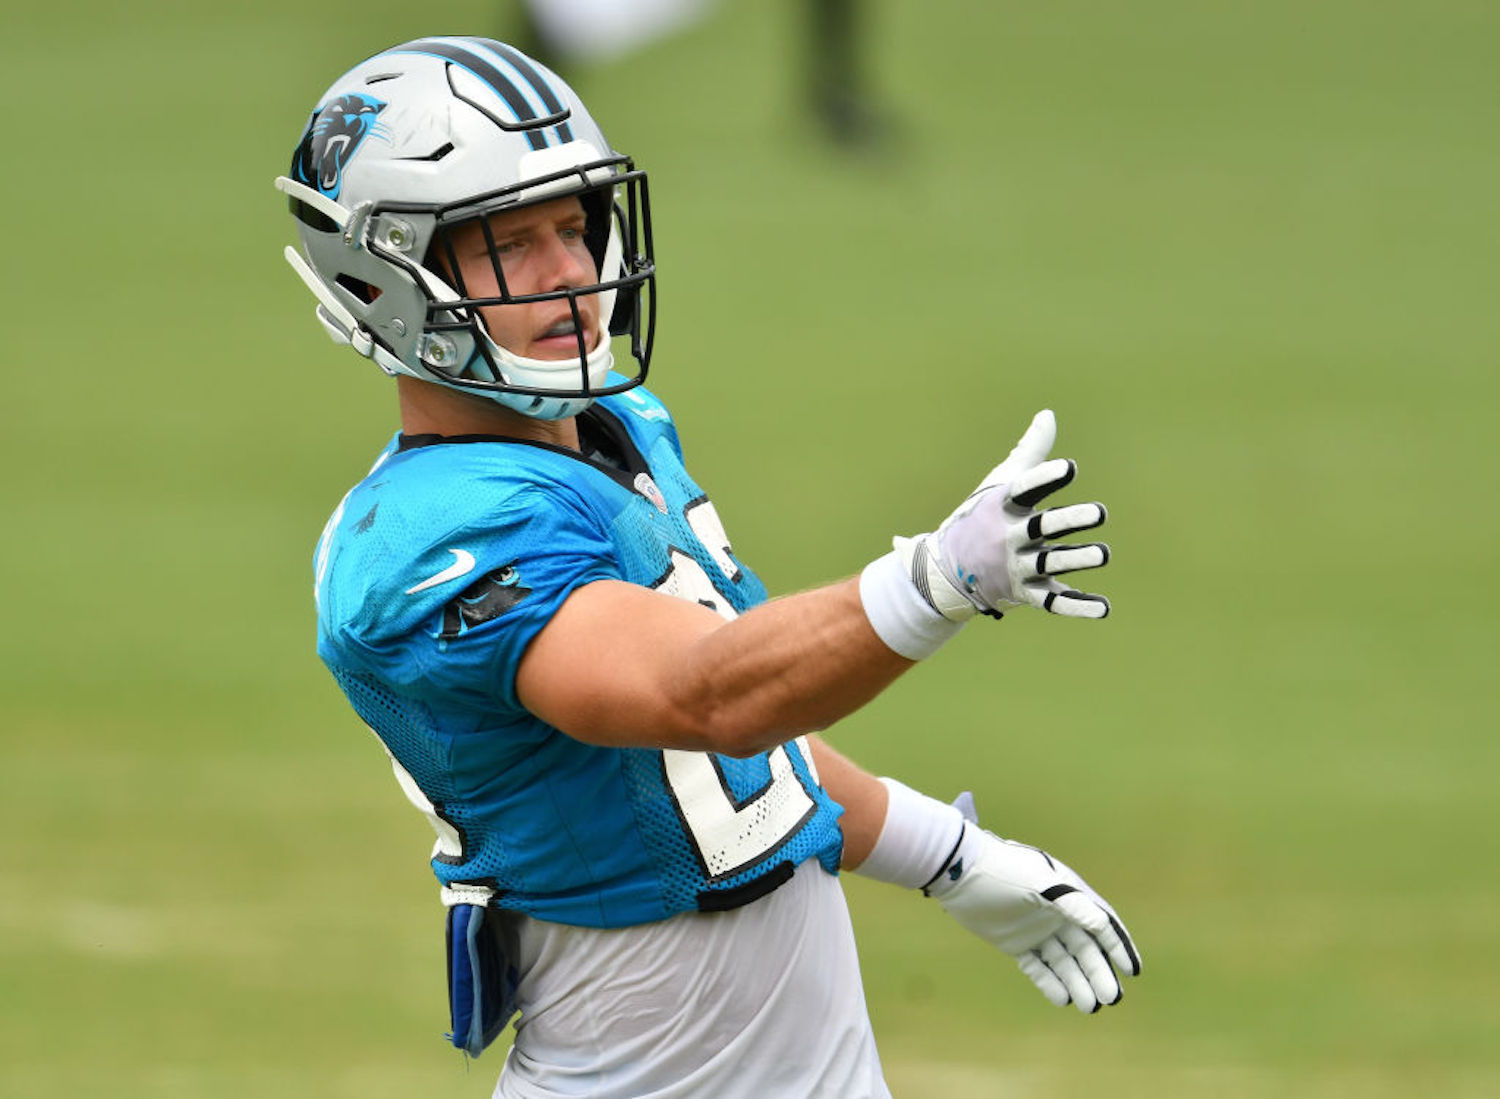 Christian McCaffrey hasn't played for the Panthers since Week 2, but he might finally get back on the field this Sunday against the Chiefs. McCaffrey hasn't played since Week 2 because of a high ankle sprain, but he might finally get back on the field this Sunday.